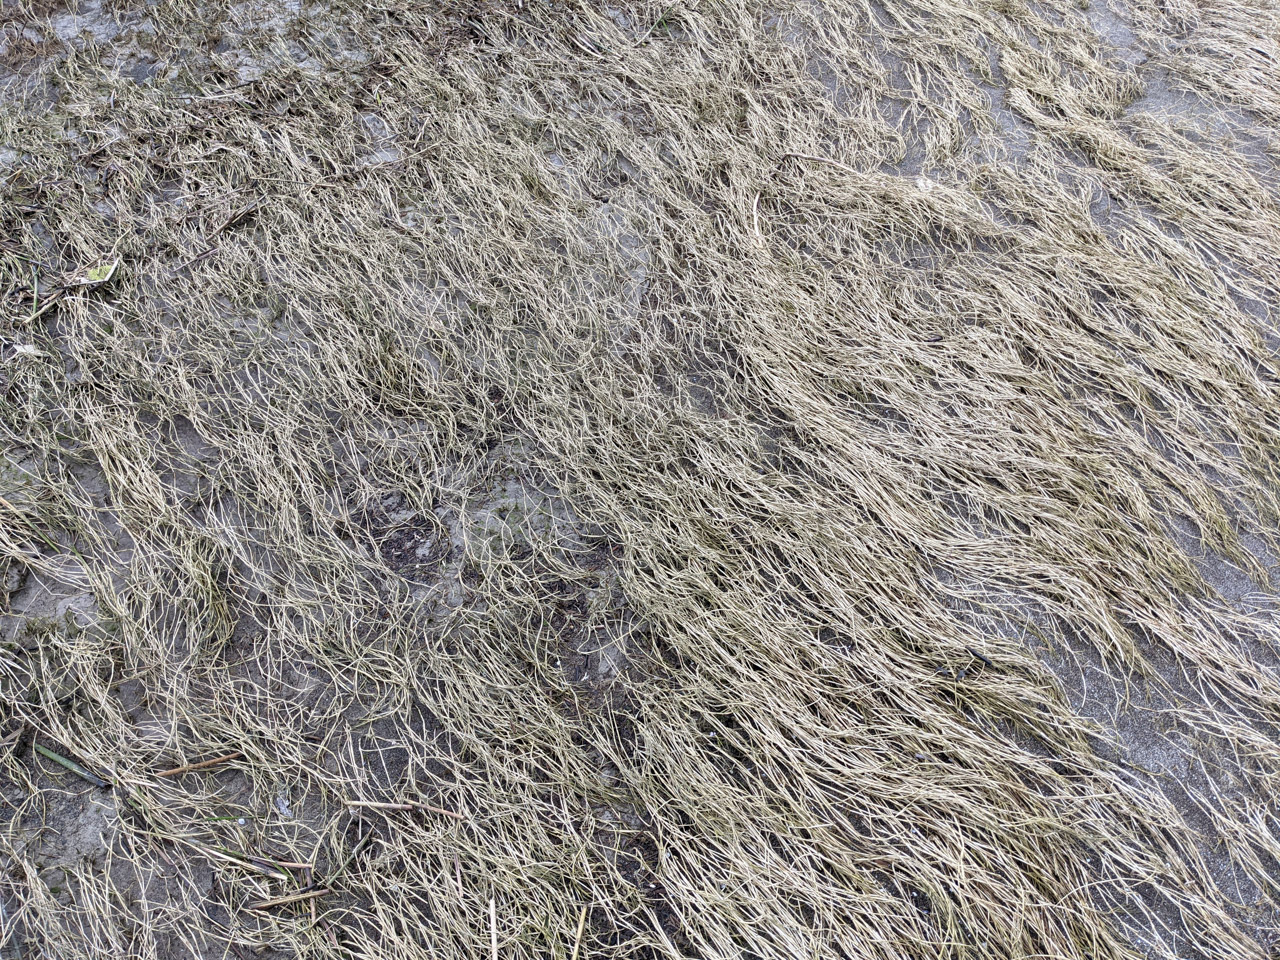 Dry sea-grass in Iona Park, Vancouver